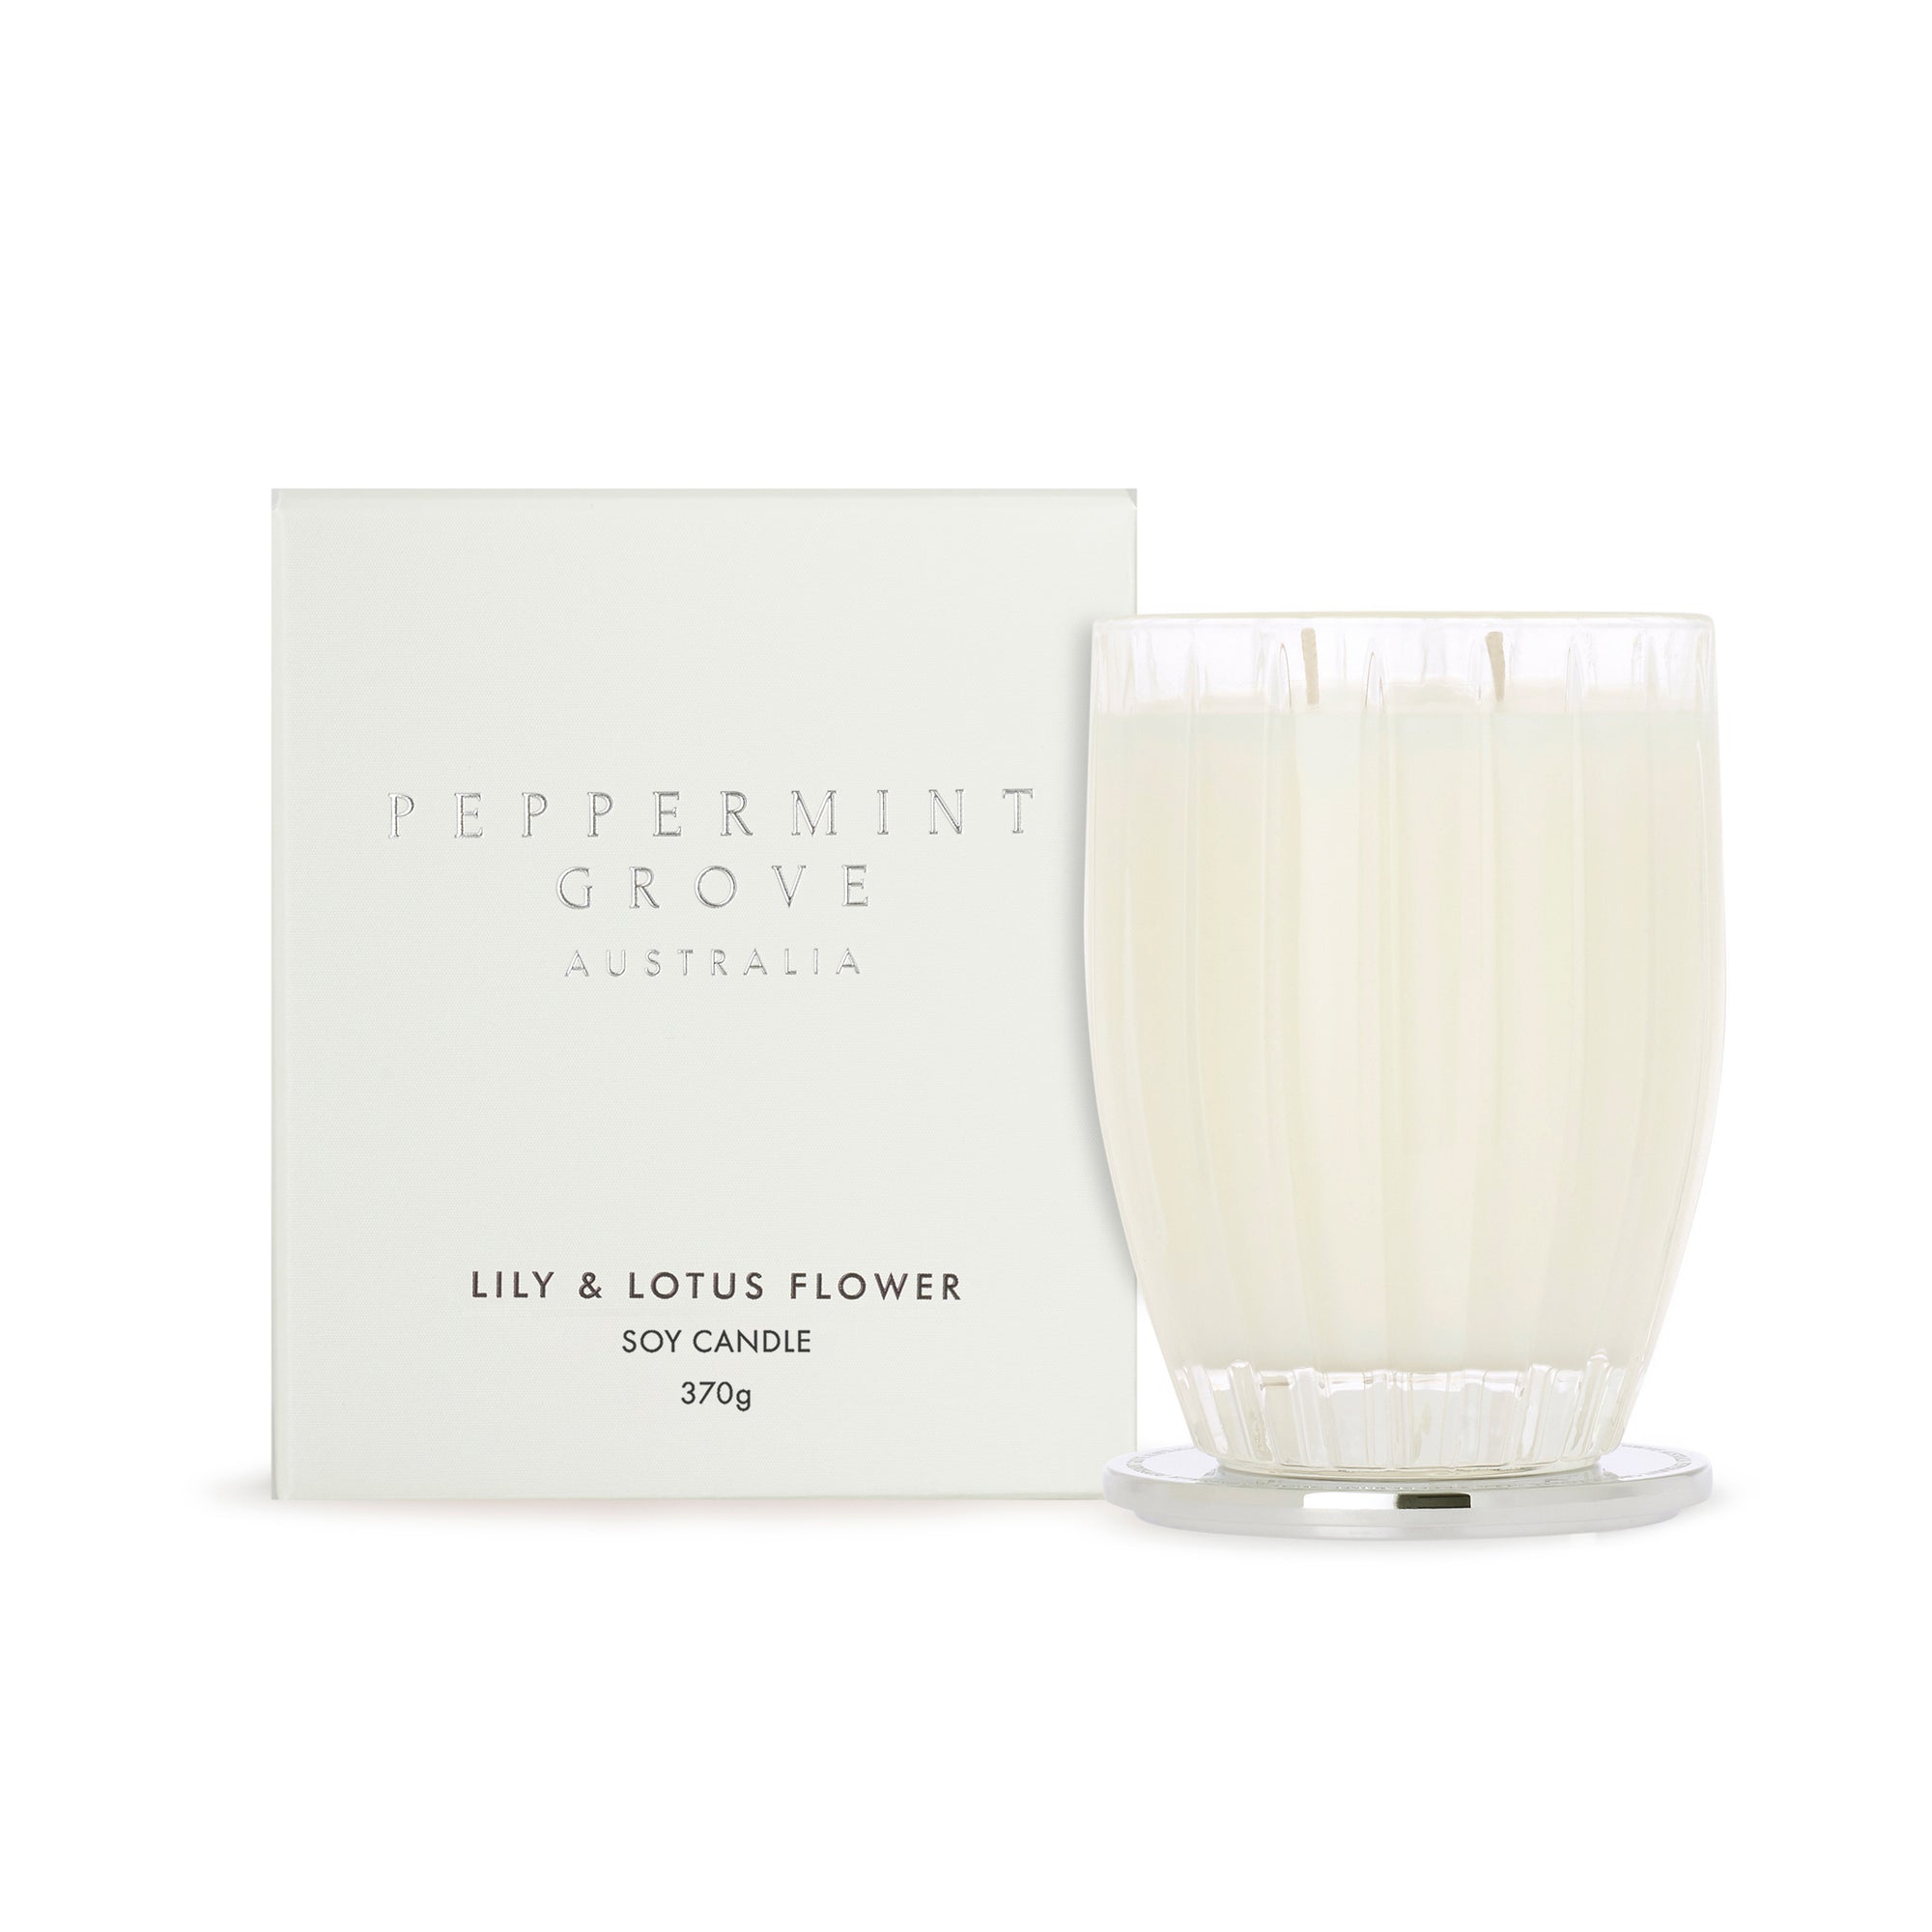 Peppermint Grove Lily & Lotus Flower Large Soy Candle 370g